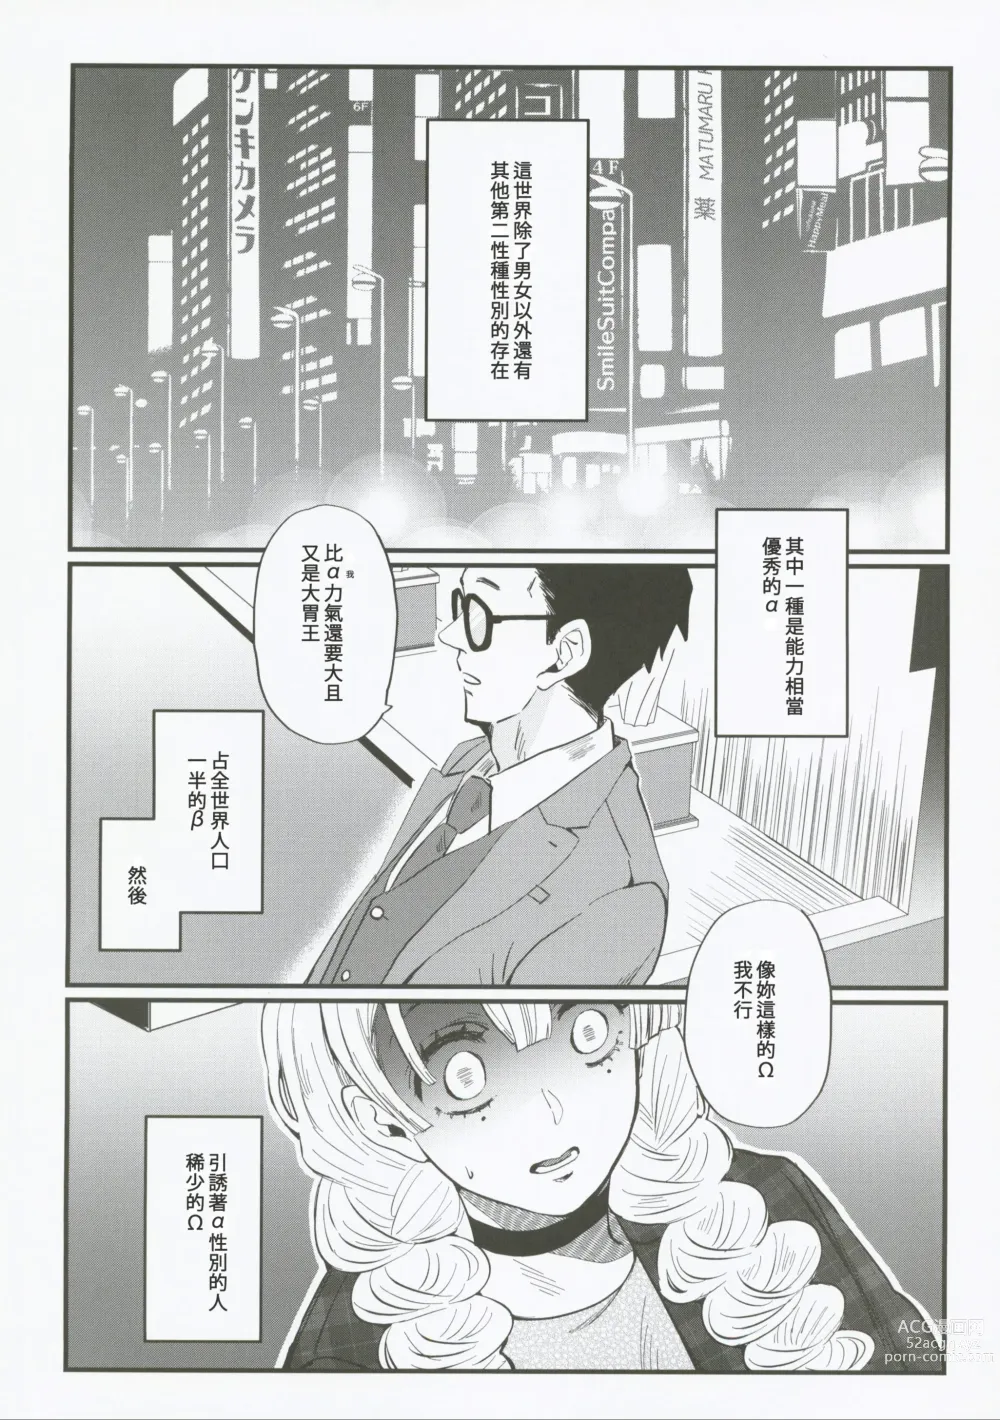 Page 5 of doujinshi 屬於妳的Omega